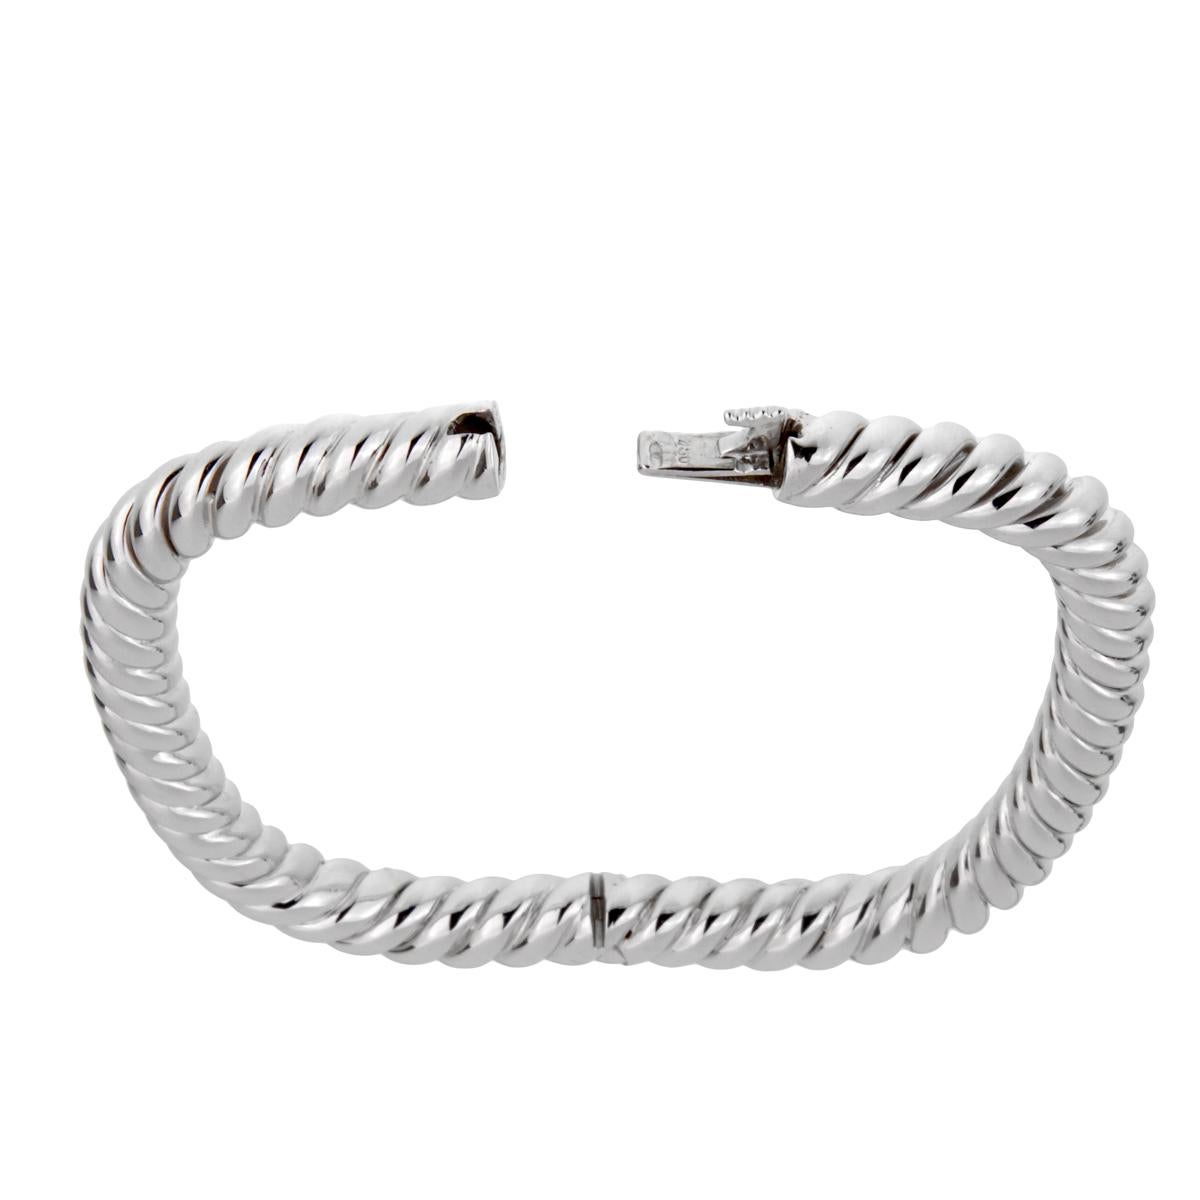 A fabulous Van Cleef & Arpels bangle bracelet circa 1990's featuring a braided design in glimmering 18k white gold. The bracelet was just cleaned and serviced and is accompanied with the documents from Van Cleef & Arpels.

Wrist Size: Upto 7 1/2